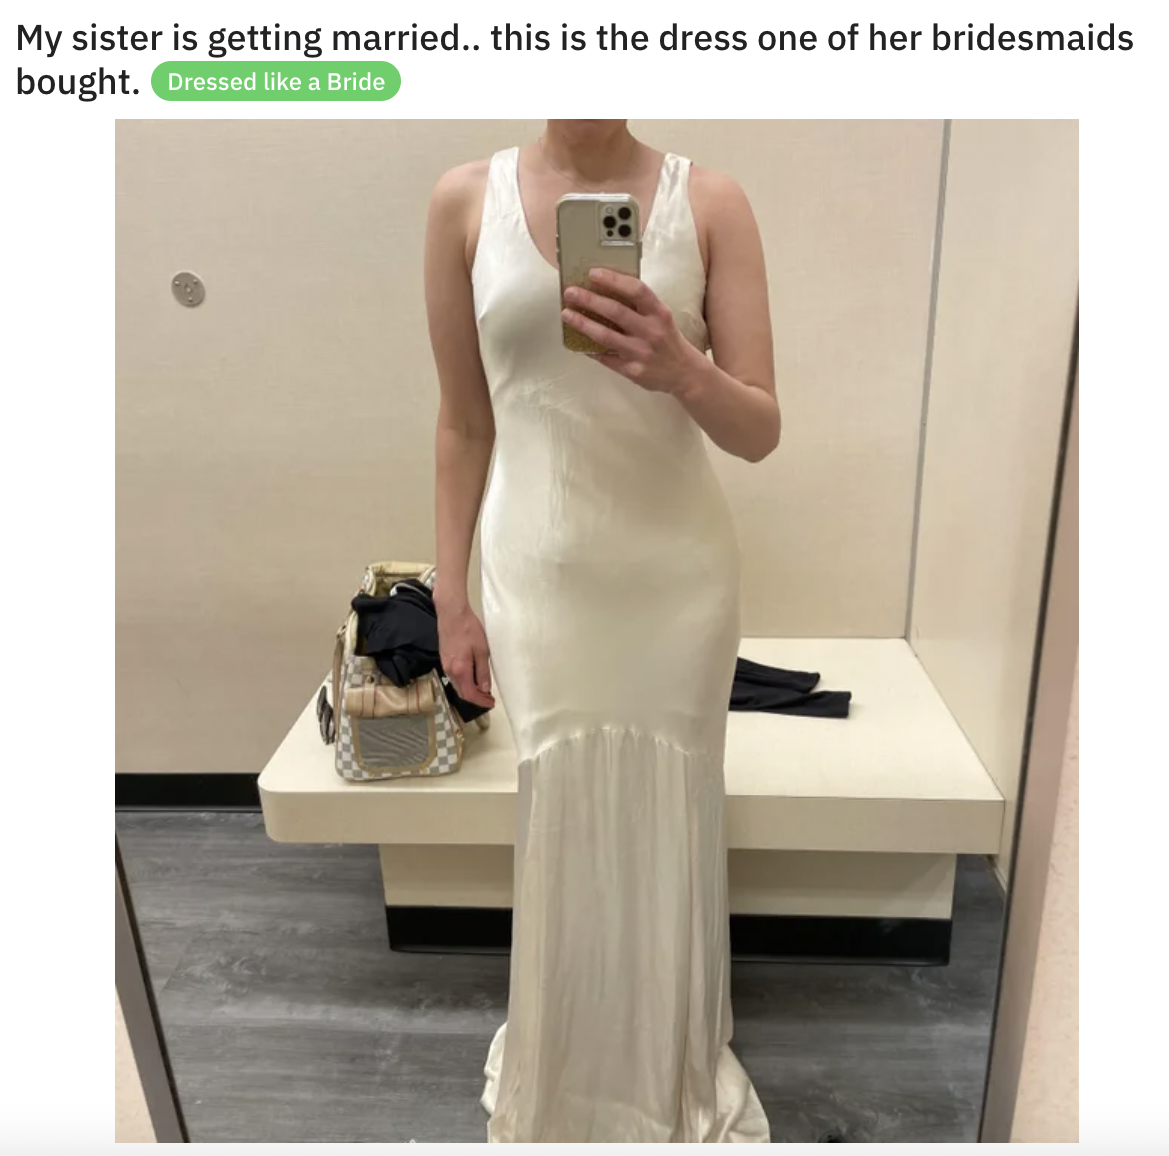 Trashy Weddings Moments - shoulder - My sister is getting married.. this is the dress one of her bridesmaids bought. Dressed a Bride